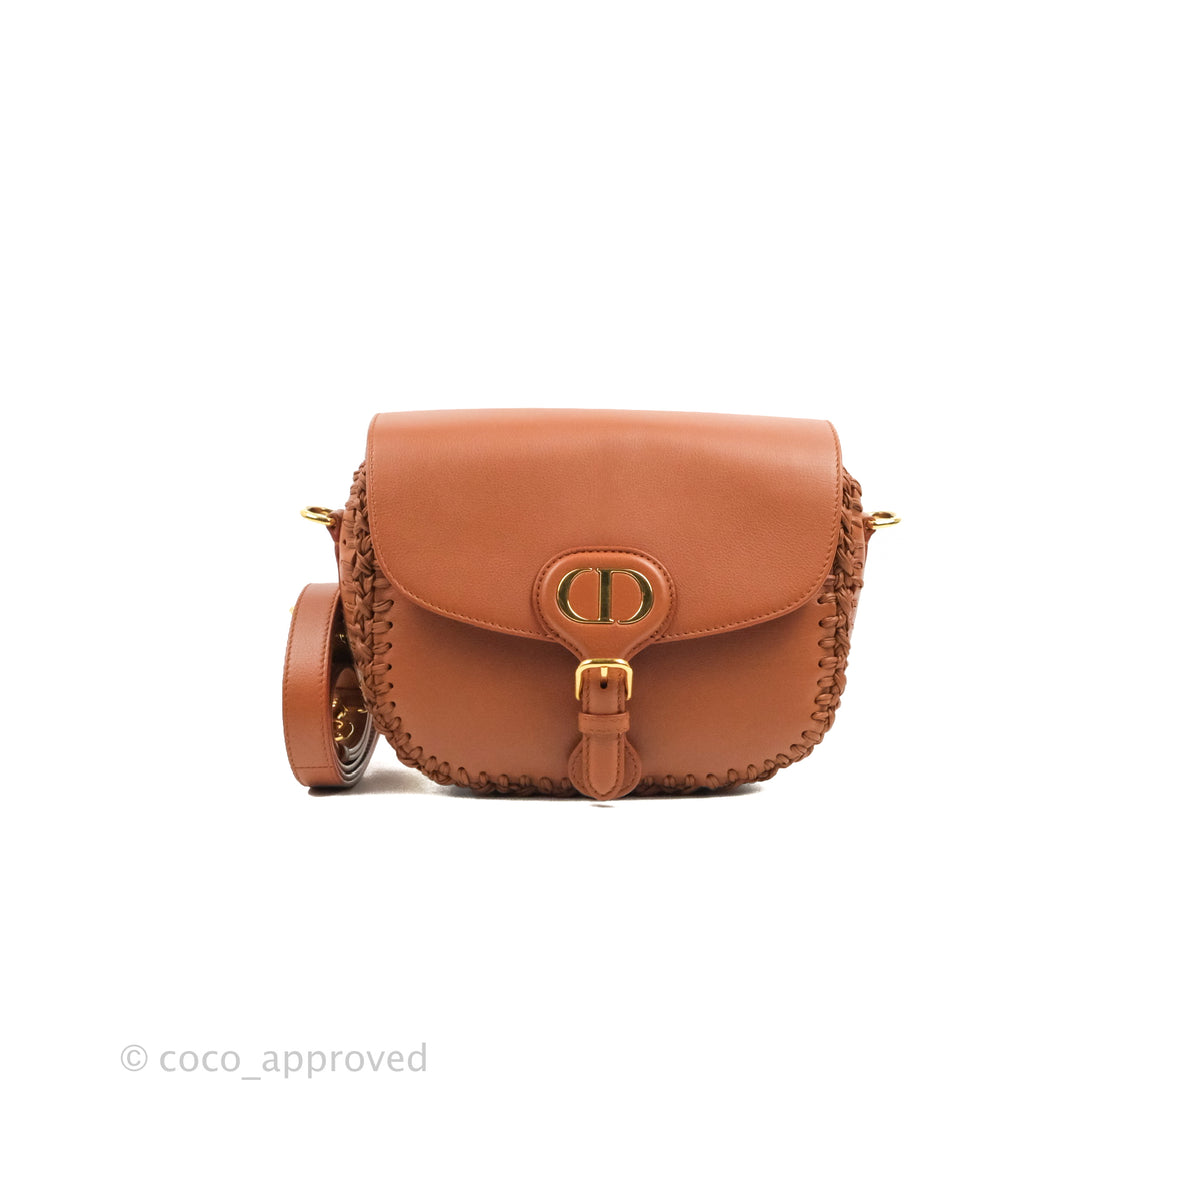 Dior Women Medium Dior Bobby Bag Grained Calfskin with Whipstitched Seams- Brown